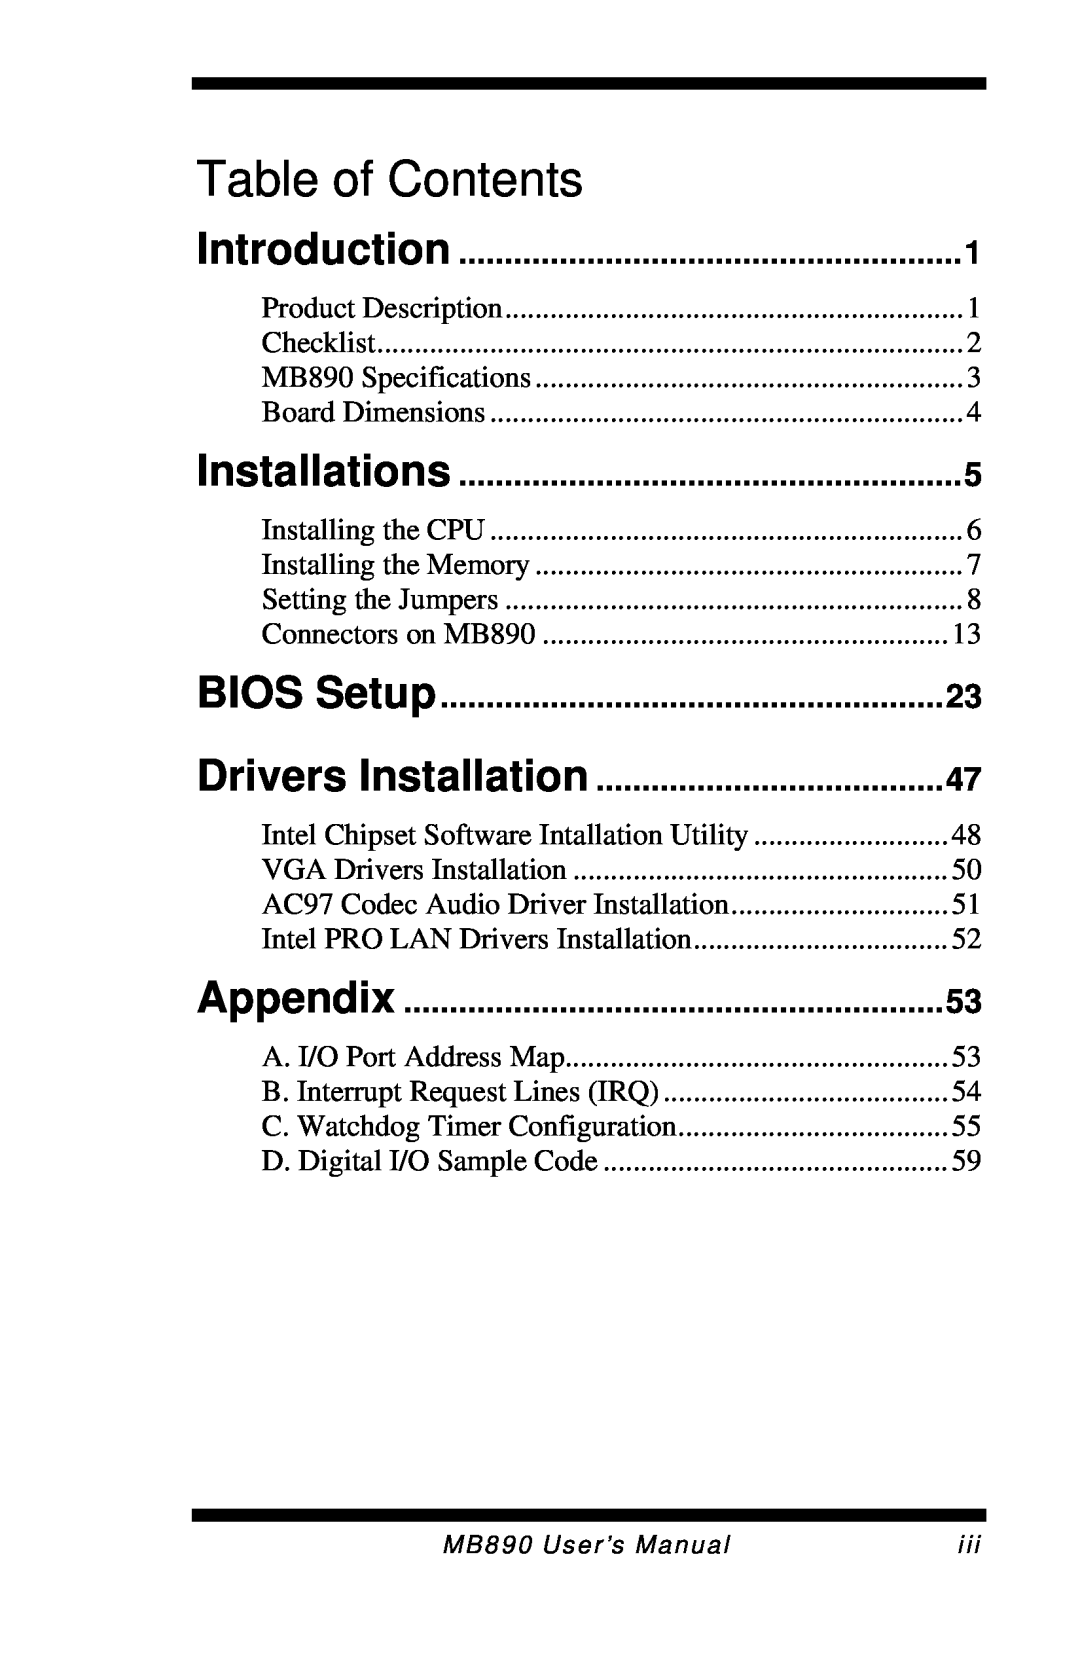 Intel MB890 user manual Introduction, Installations, BIOS Setup, Drivers Installation, Appendix, Table of Contents 